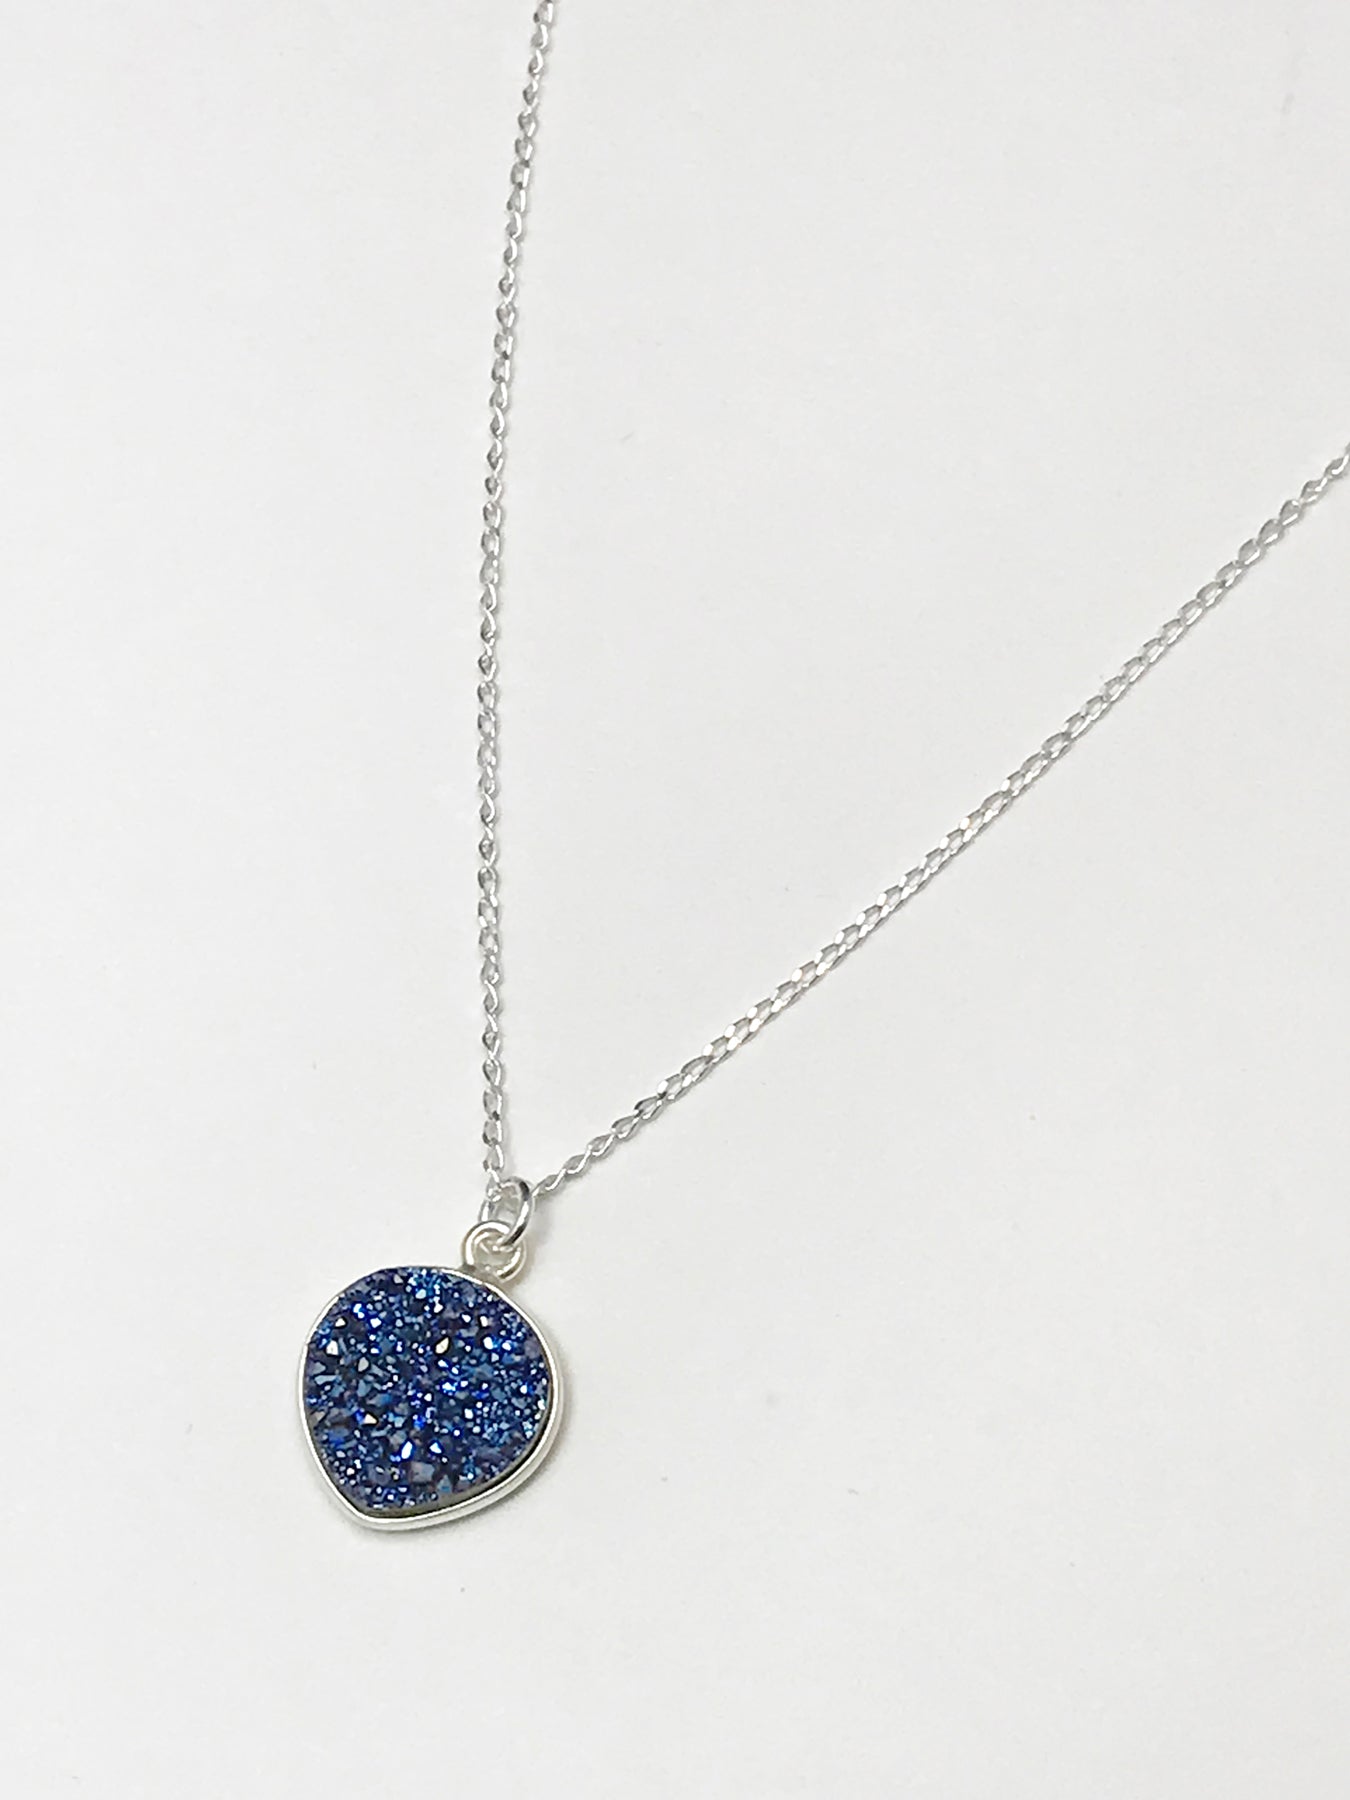 Blue Druzy Necklace & Sterling Silver Chain